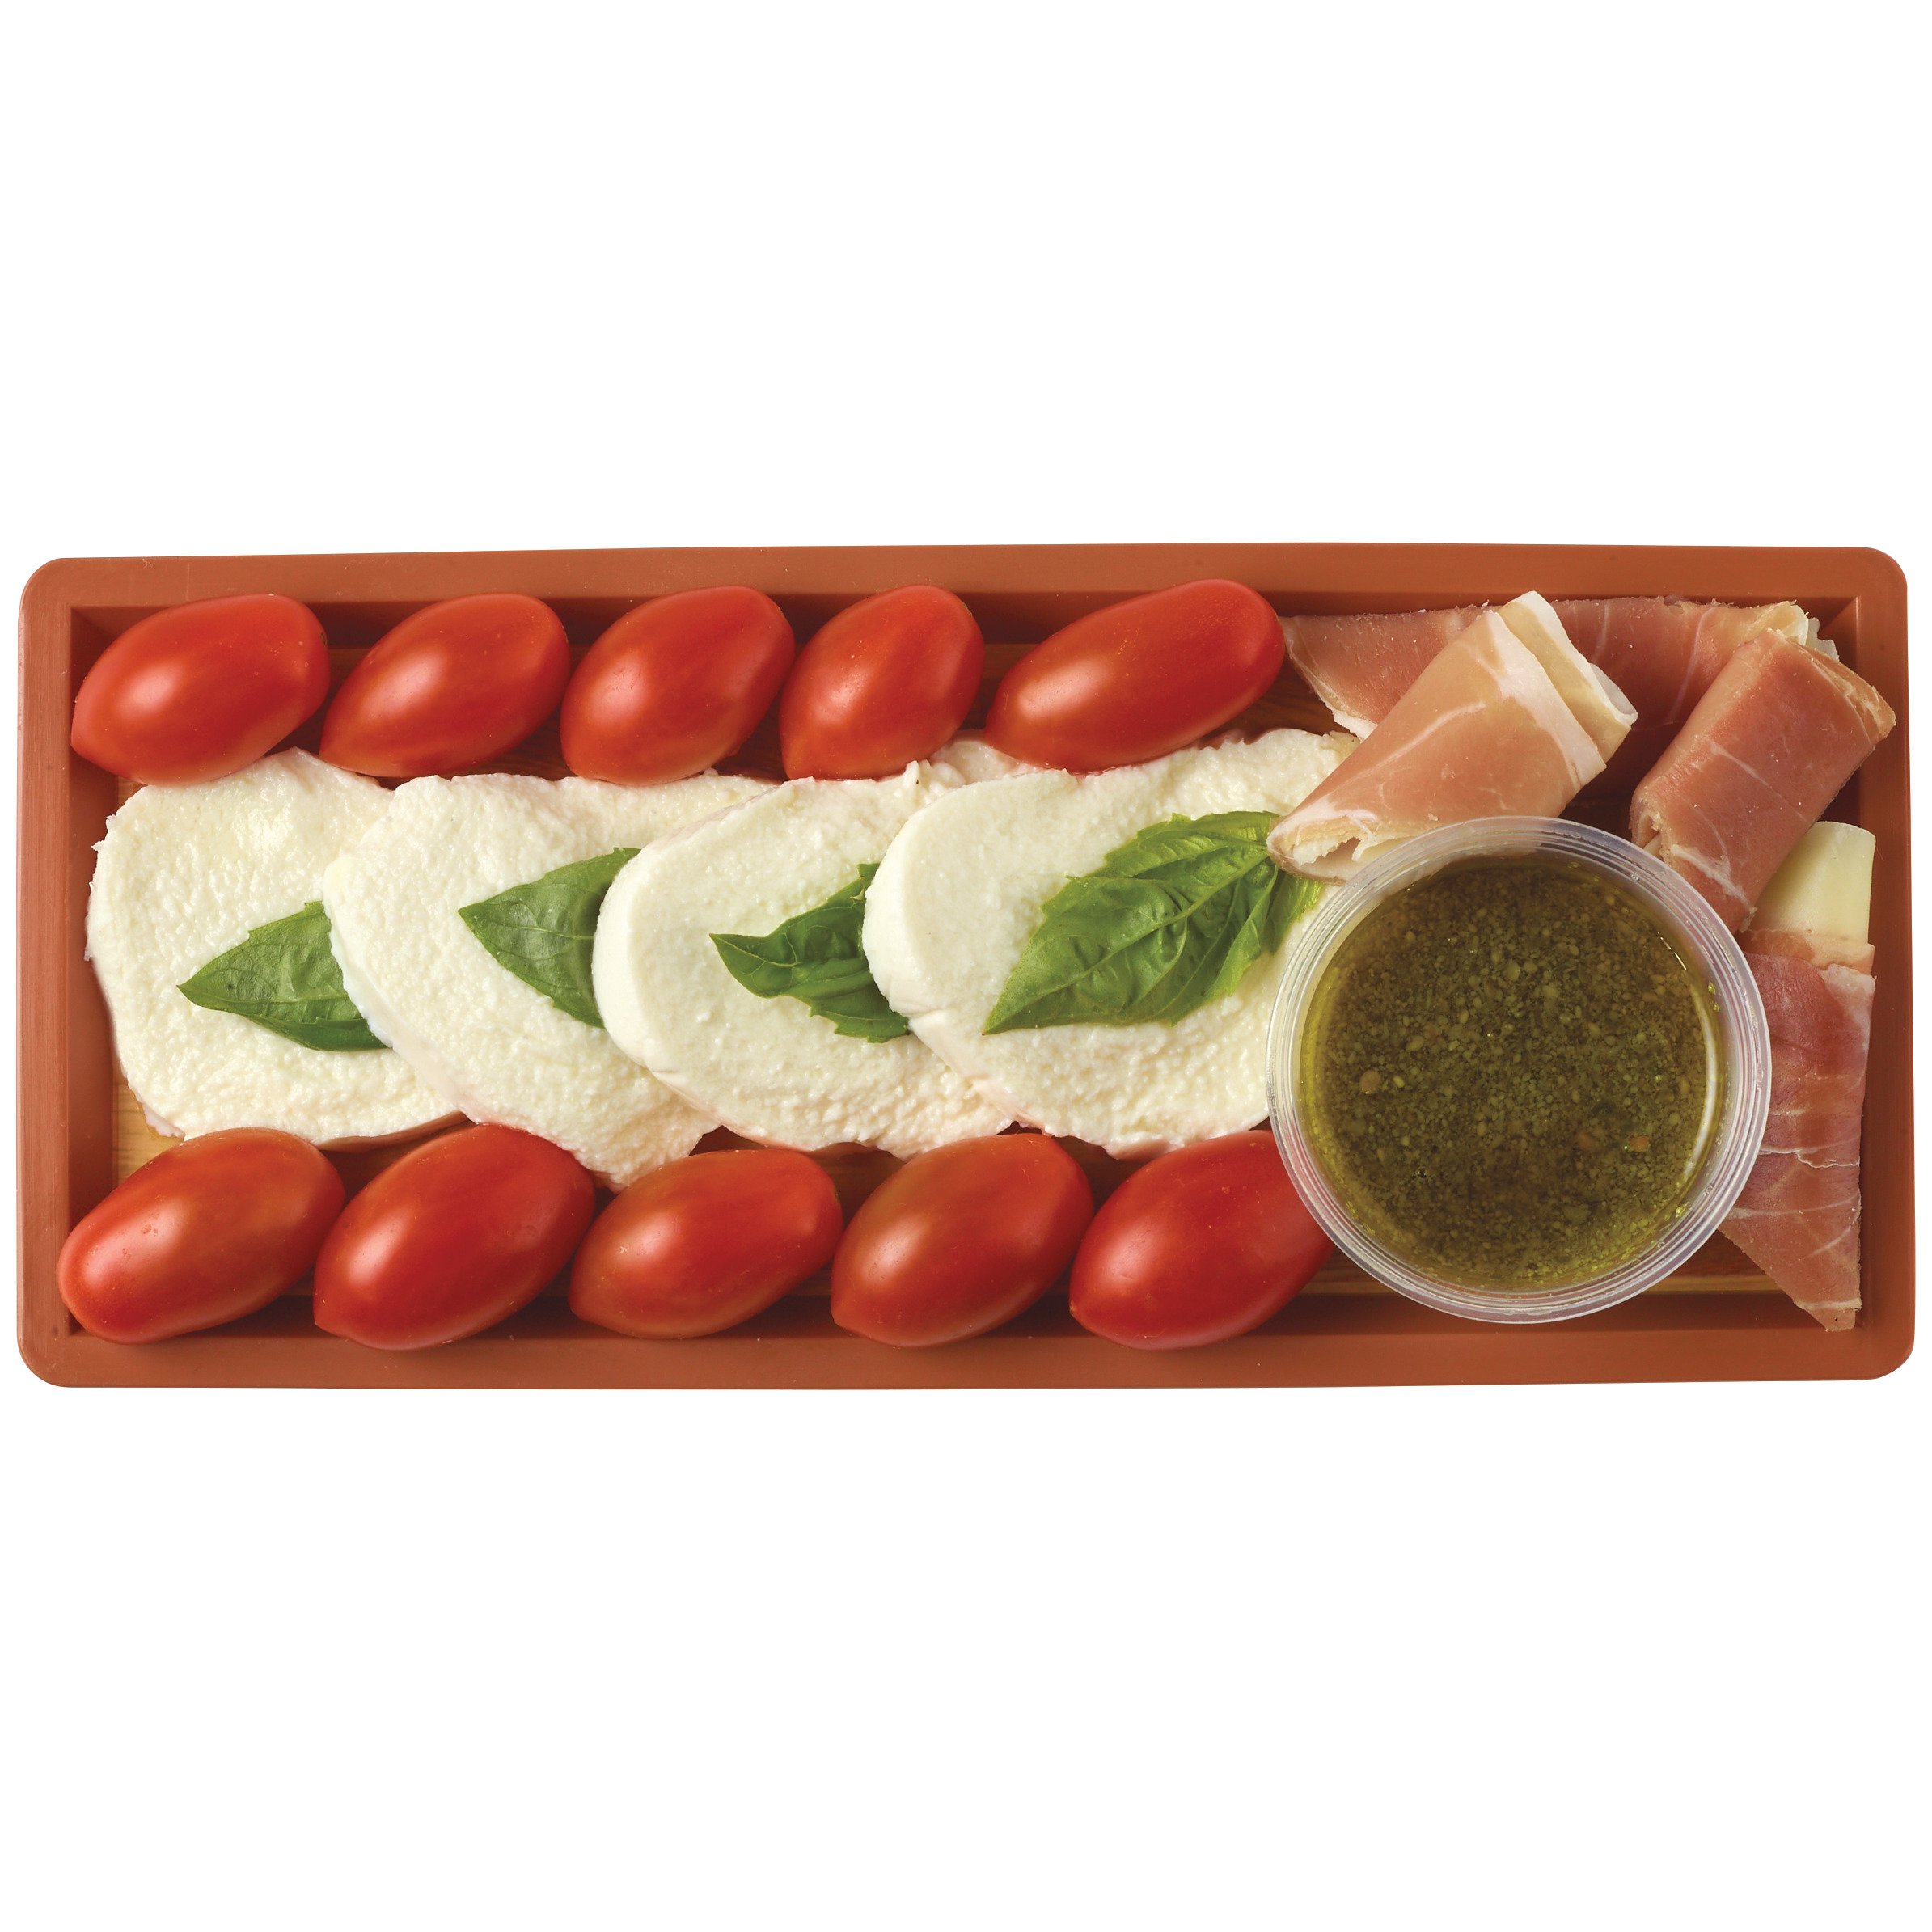 H-E-B Deli Meat & Cheeseboard - Caprese - Shop Standard Party Trays at ...